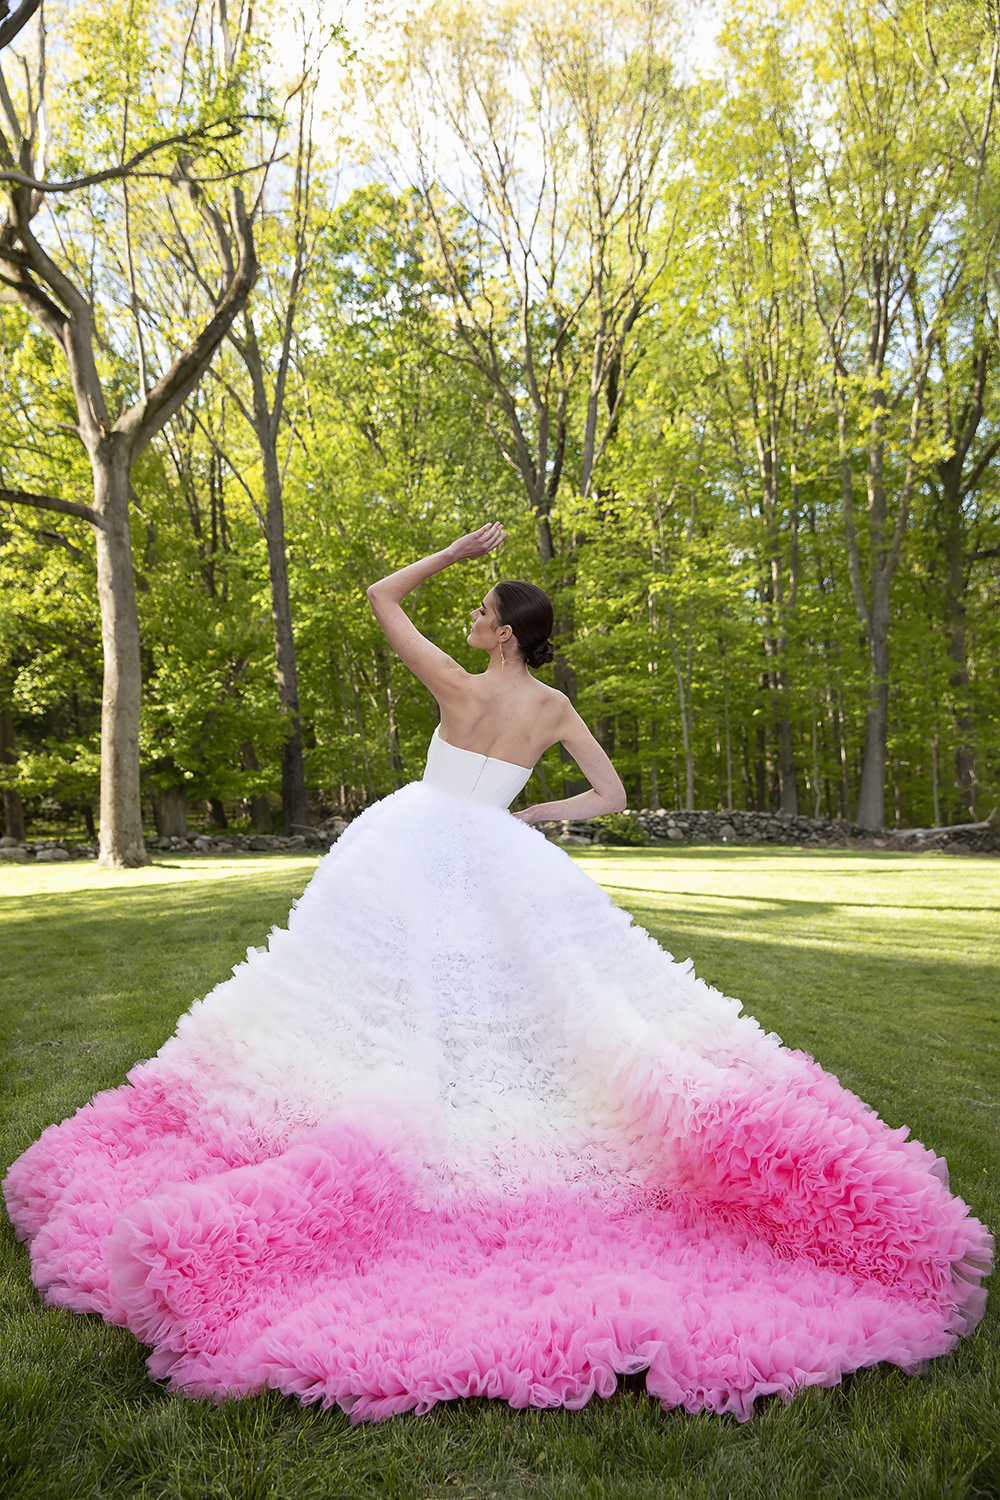 PINK OMBRE EMBROIDERED TULLE POPPY GOWN BY CHRISTIAN SIRIANO